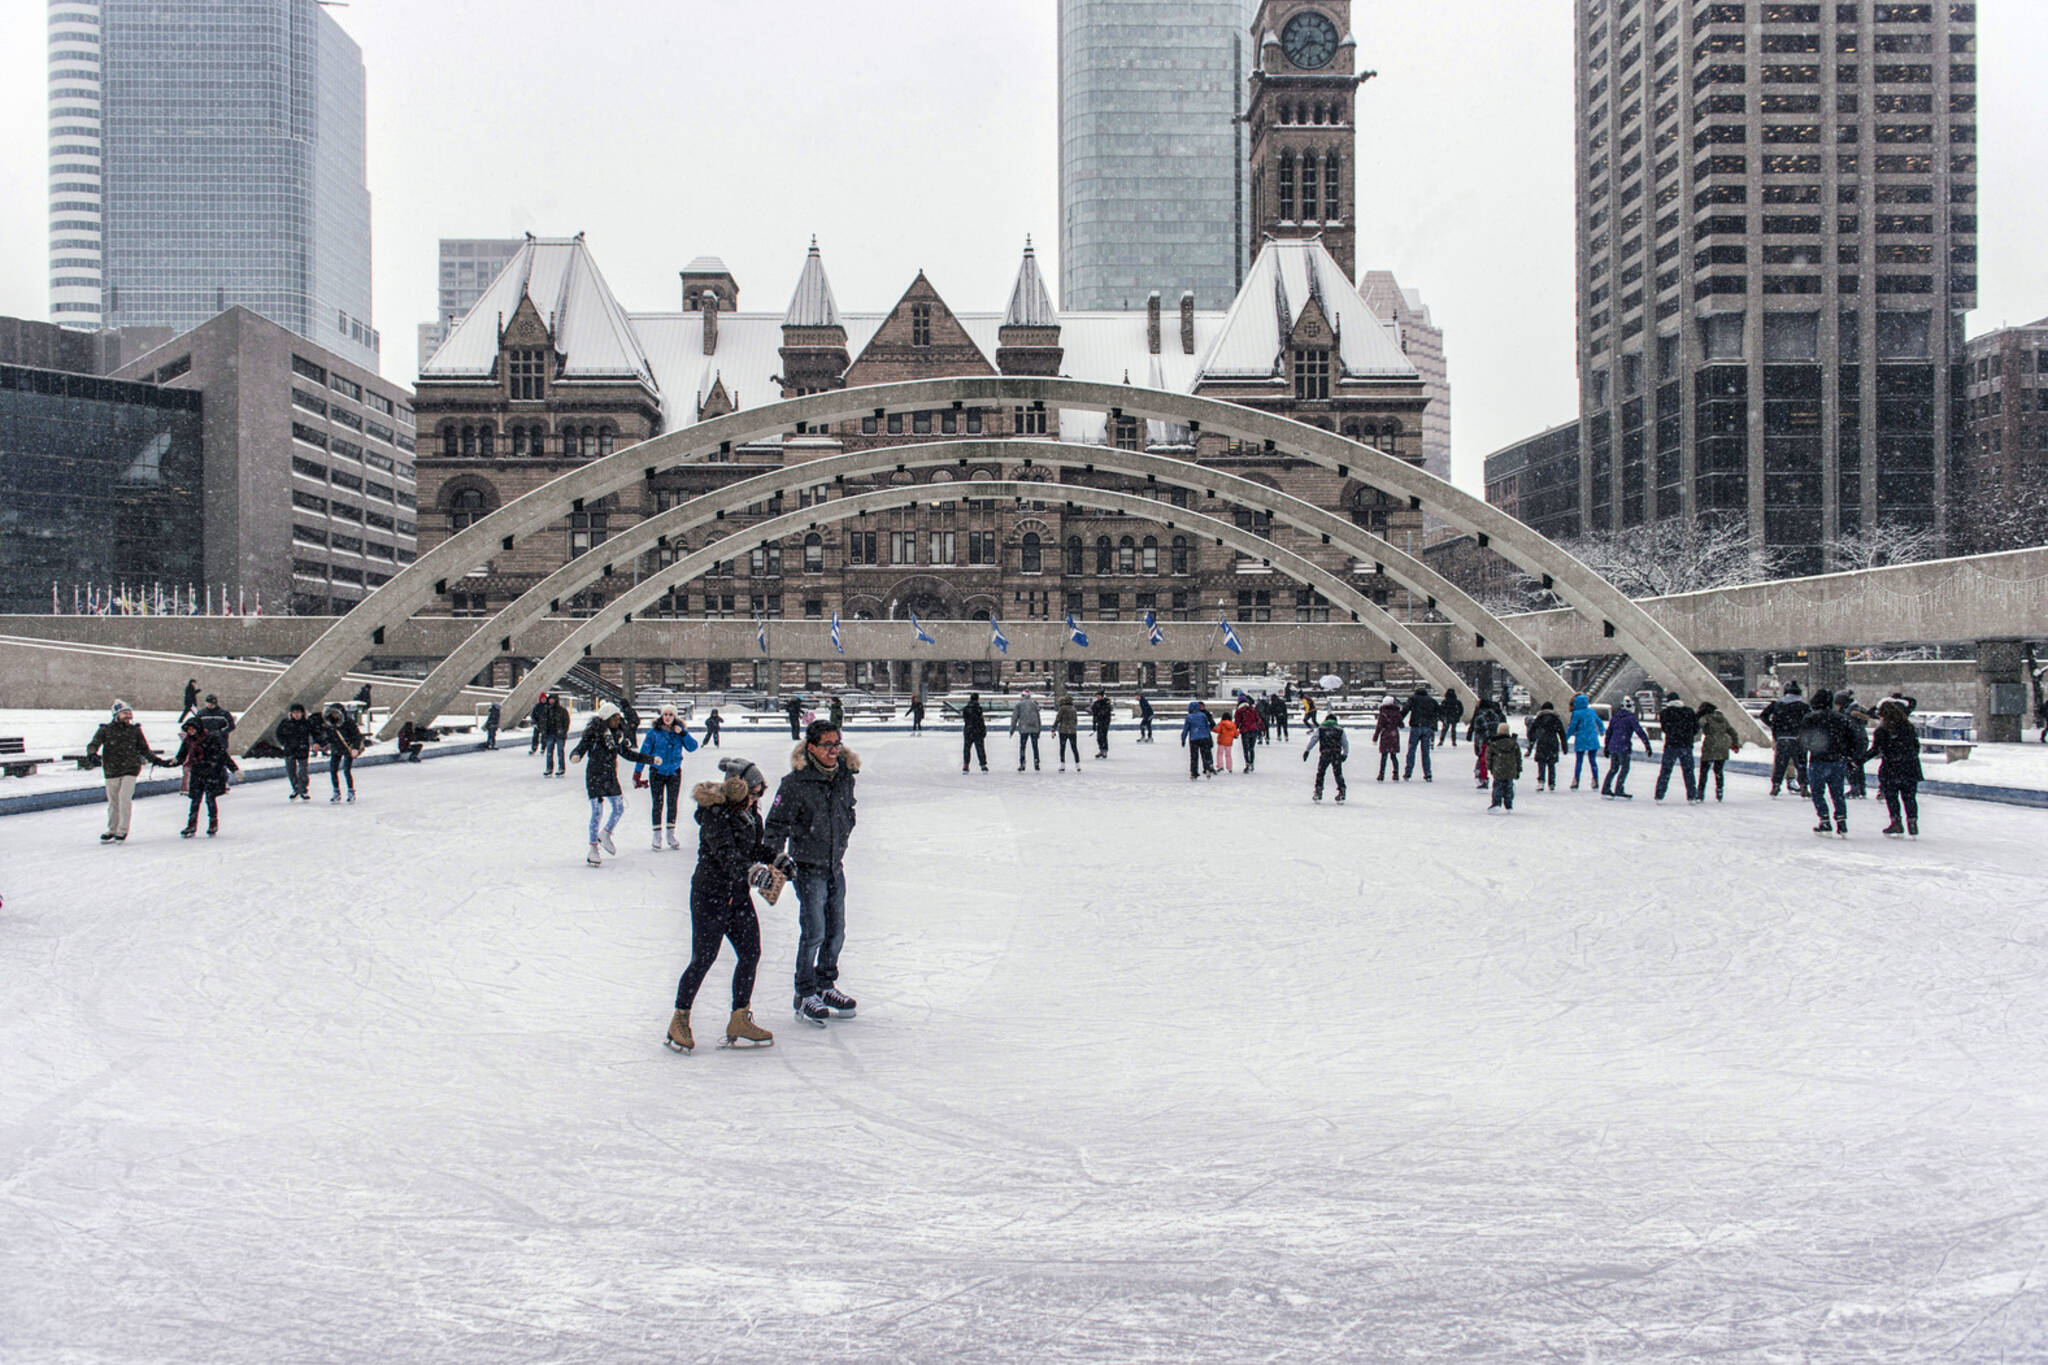 Here's a map of all the outdoor skating rinks in Toronto